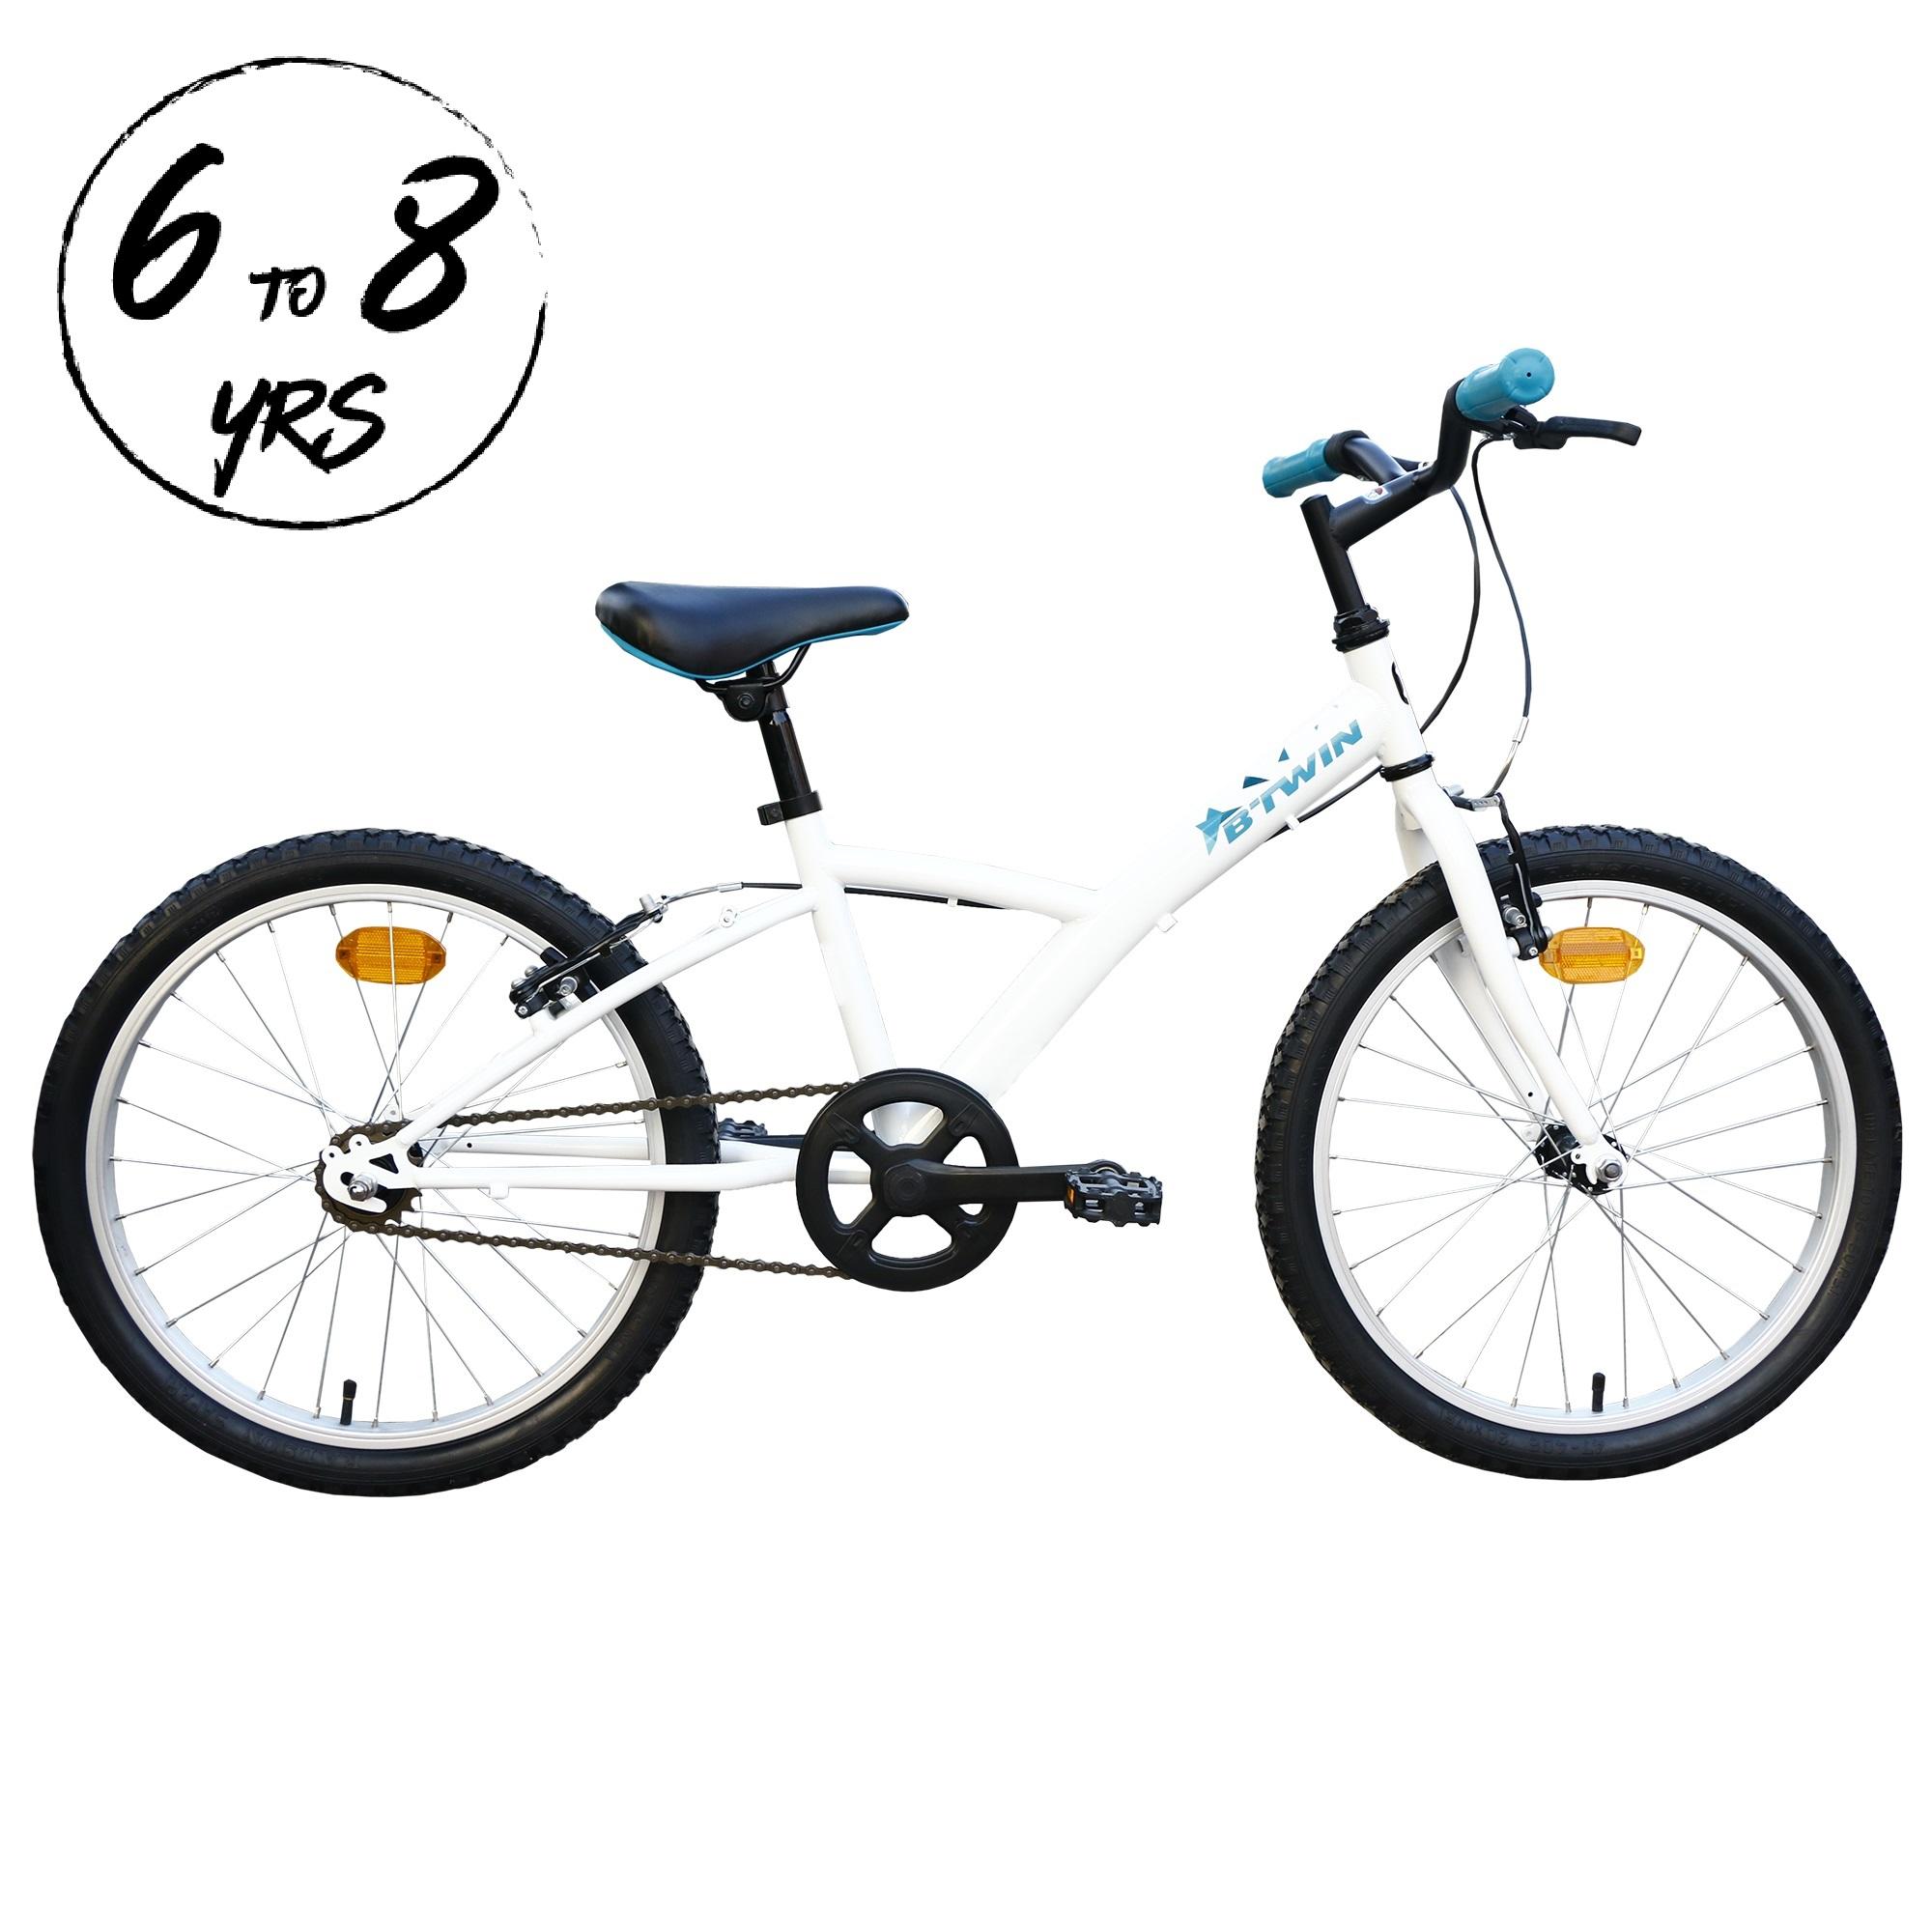 decathlon cycles for kids